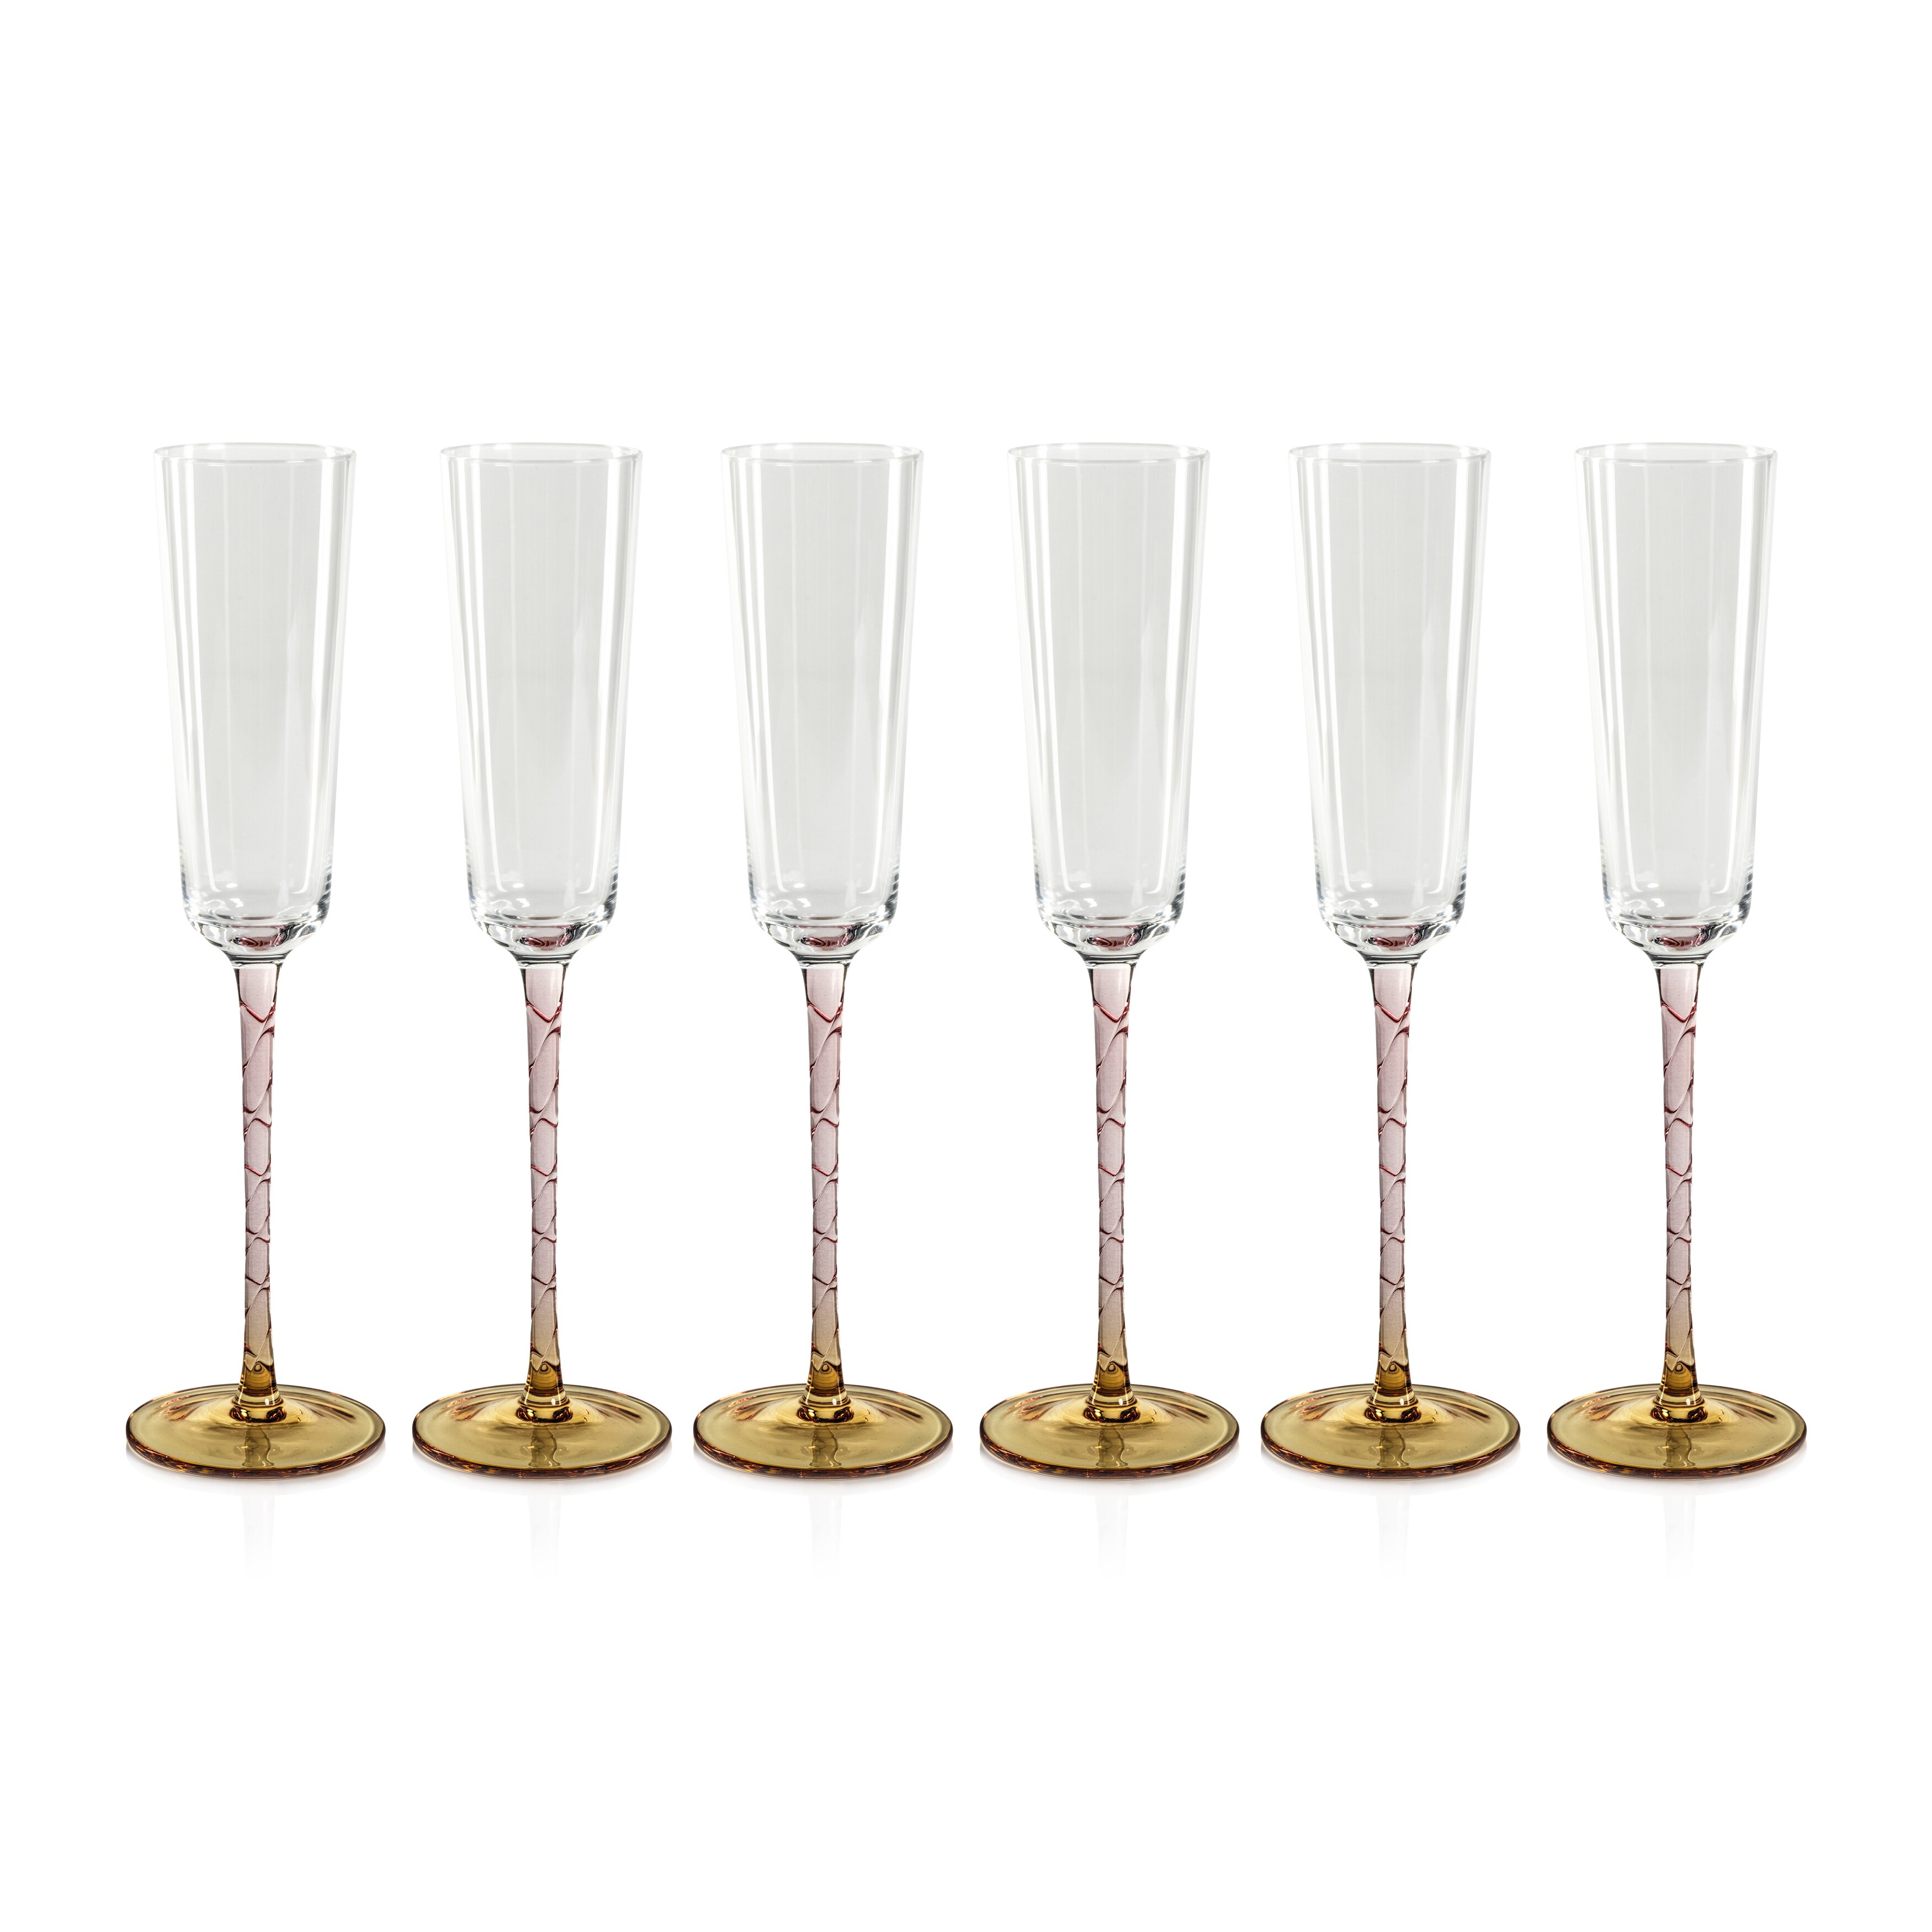 https://ak1.ostkcdn.com/images/products/is/images/direct/888f455ab4a14e6809bf0befbcce94c4ab02677d/Sachi-Champagne-Flutes%2C-Set-of-6.jpg